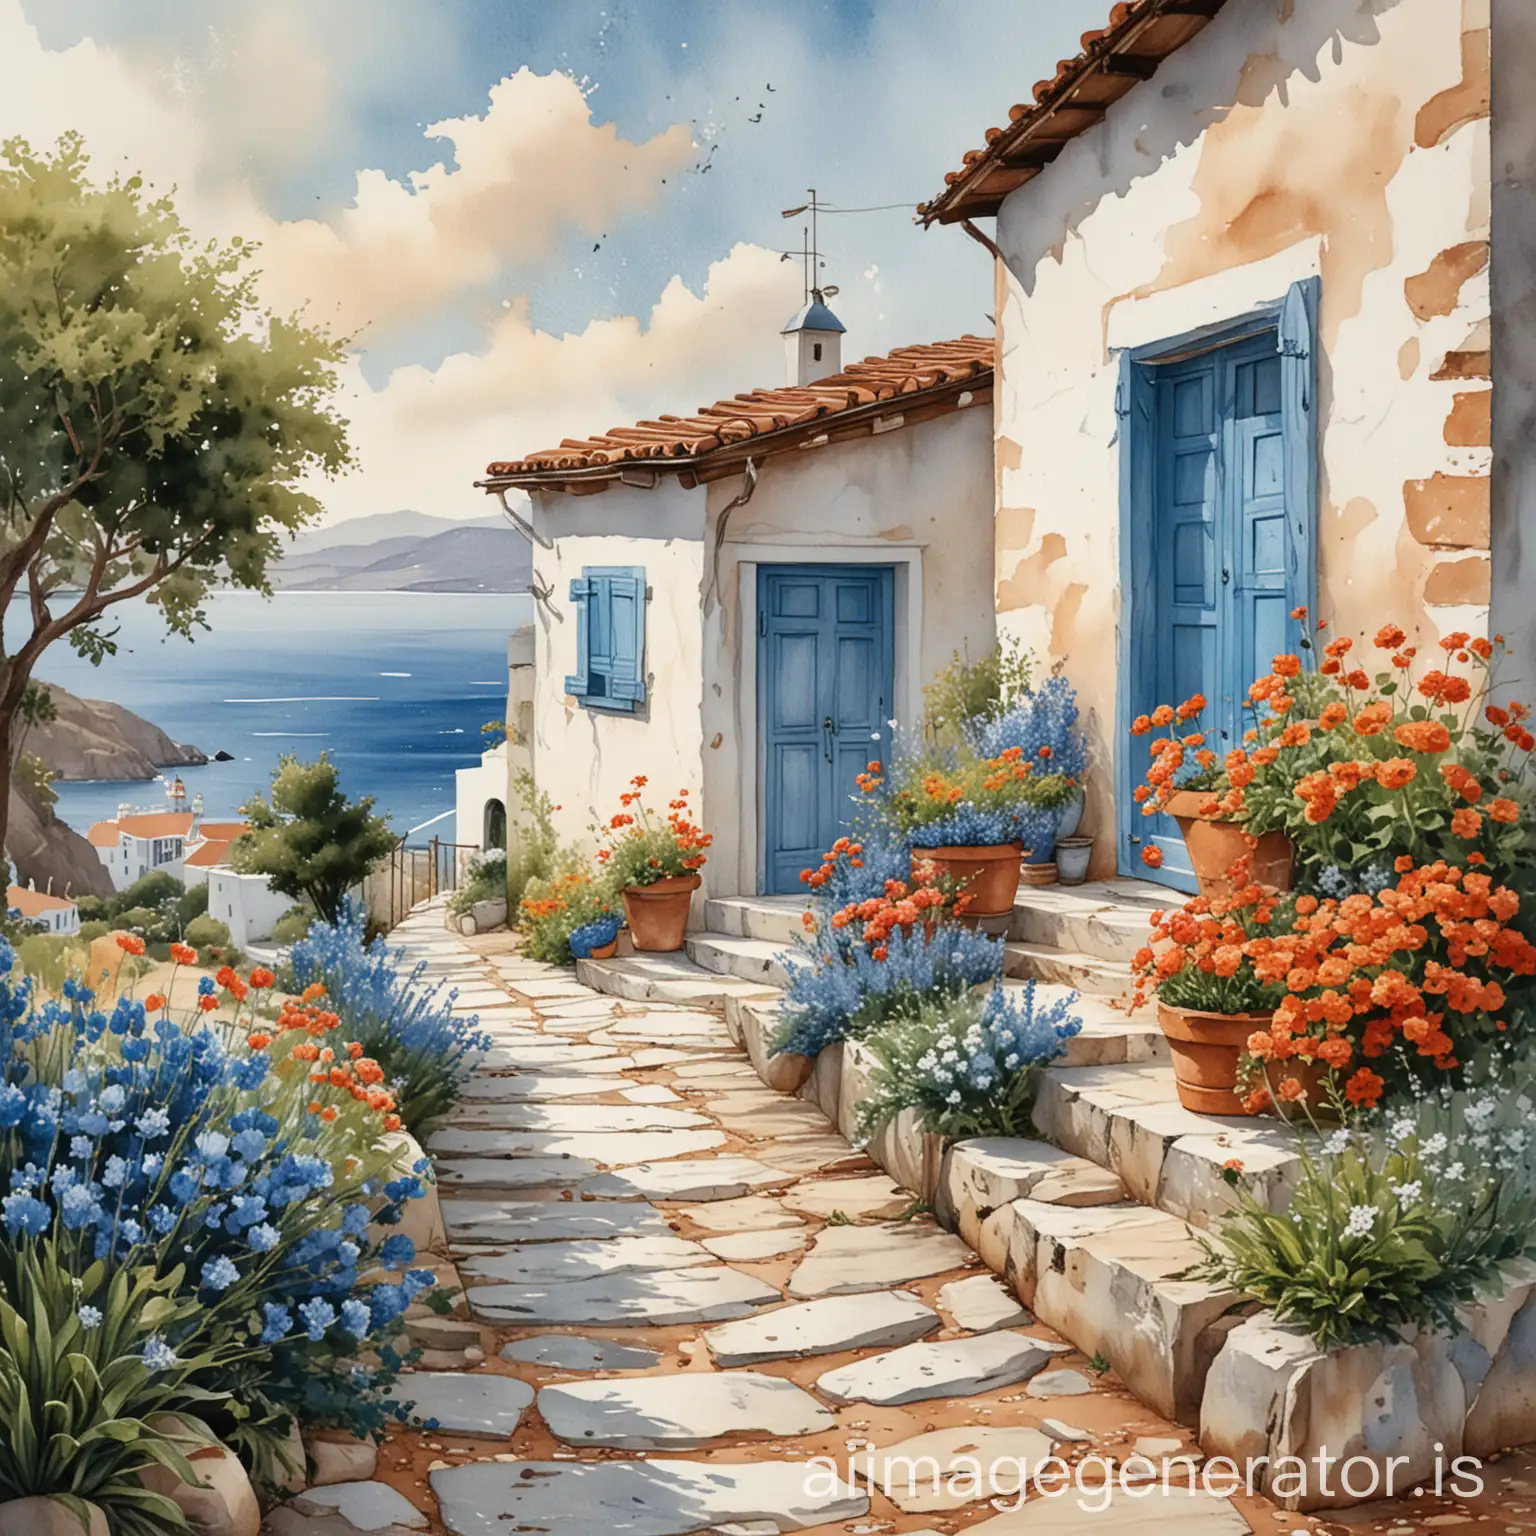 Tranquil-Greek-Coastal-Home-with-Flowers-and-Sailboat